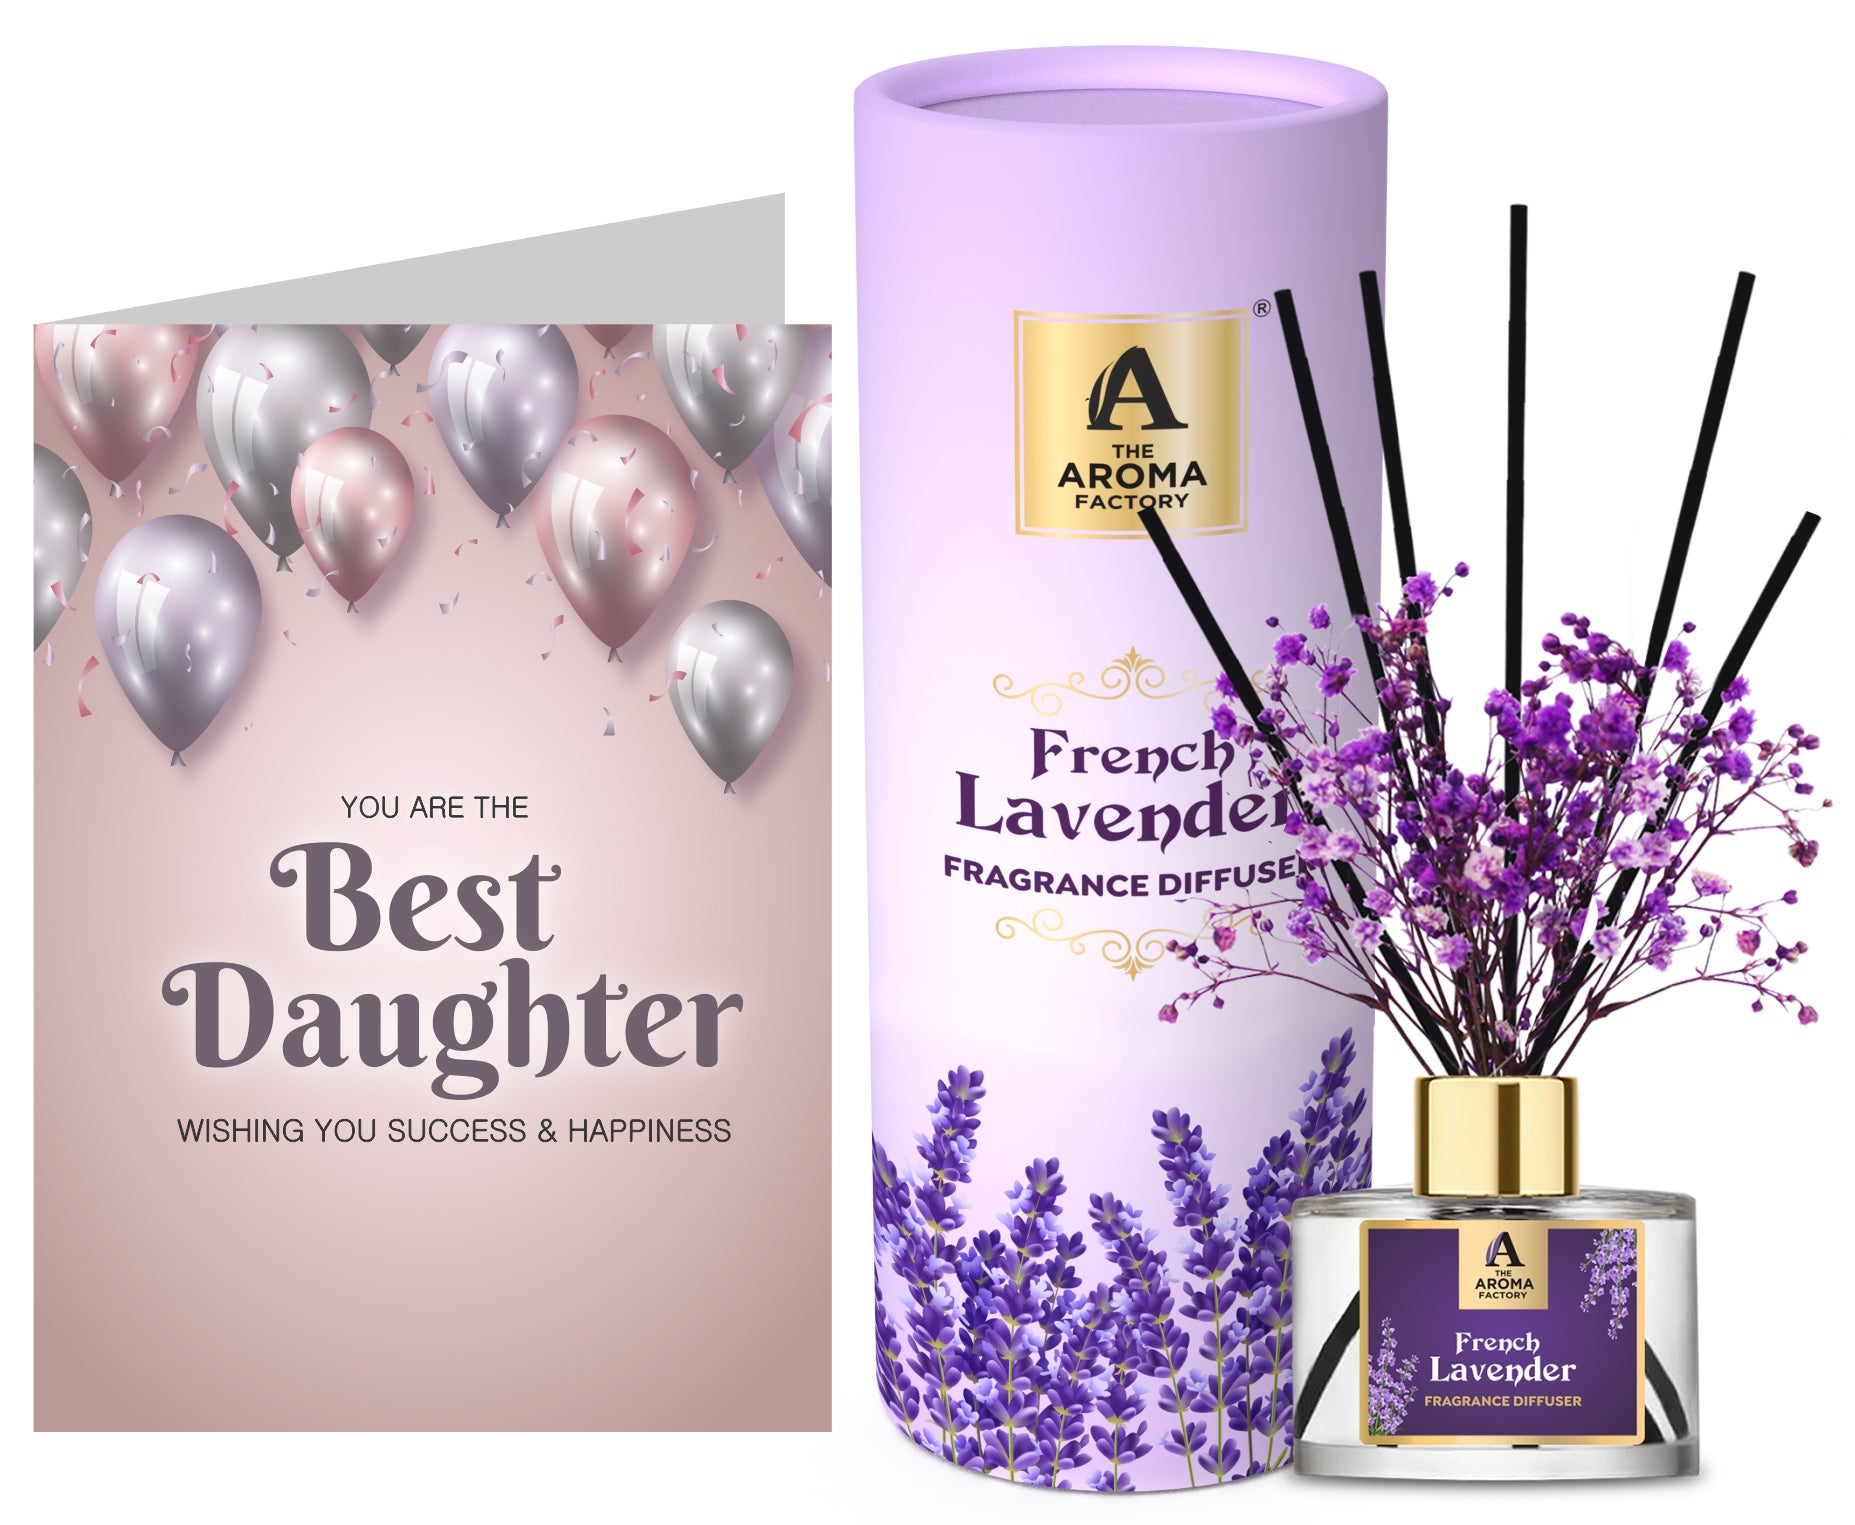 The Aroma Factory Best Daughter Gift with Card, French Lavender Fragrance Reed Diffuser Set (1 Box &1 Card)